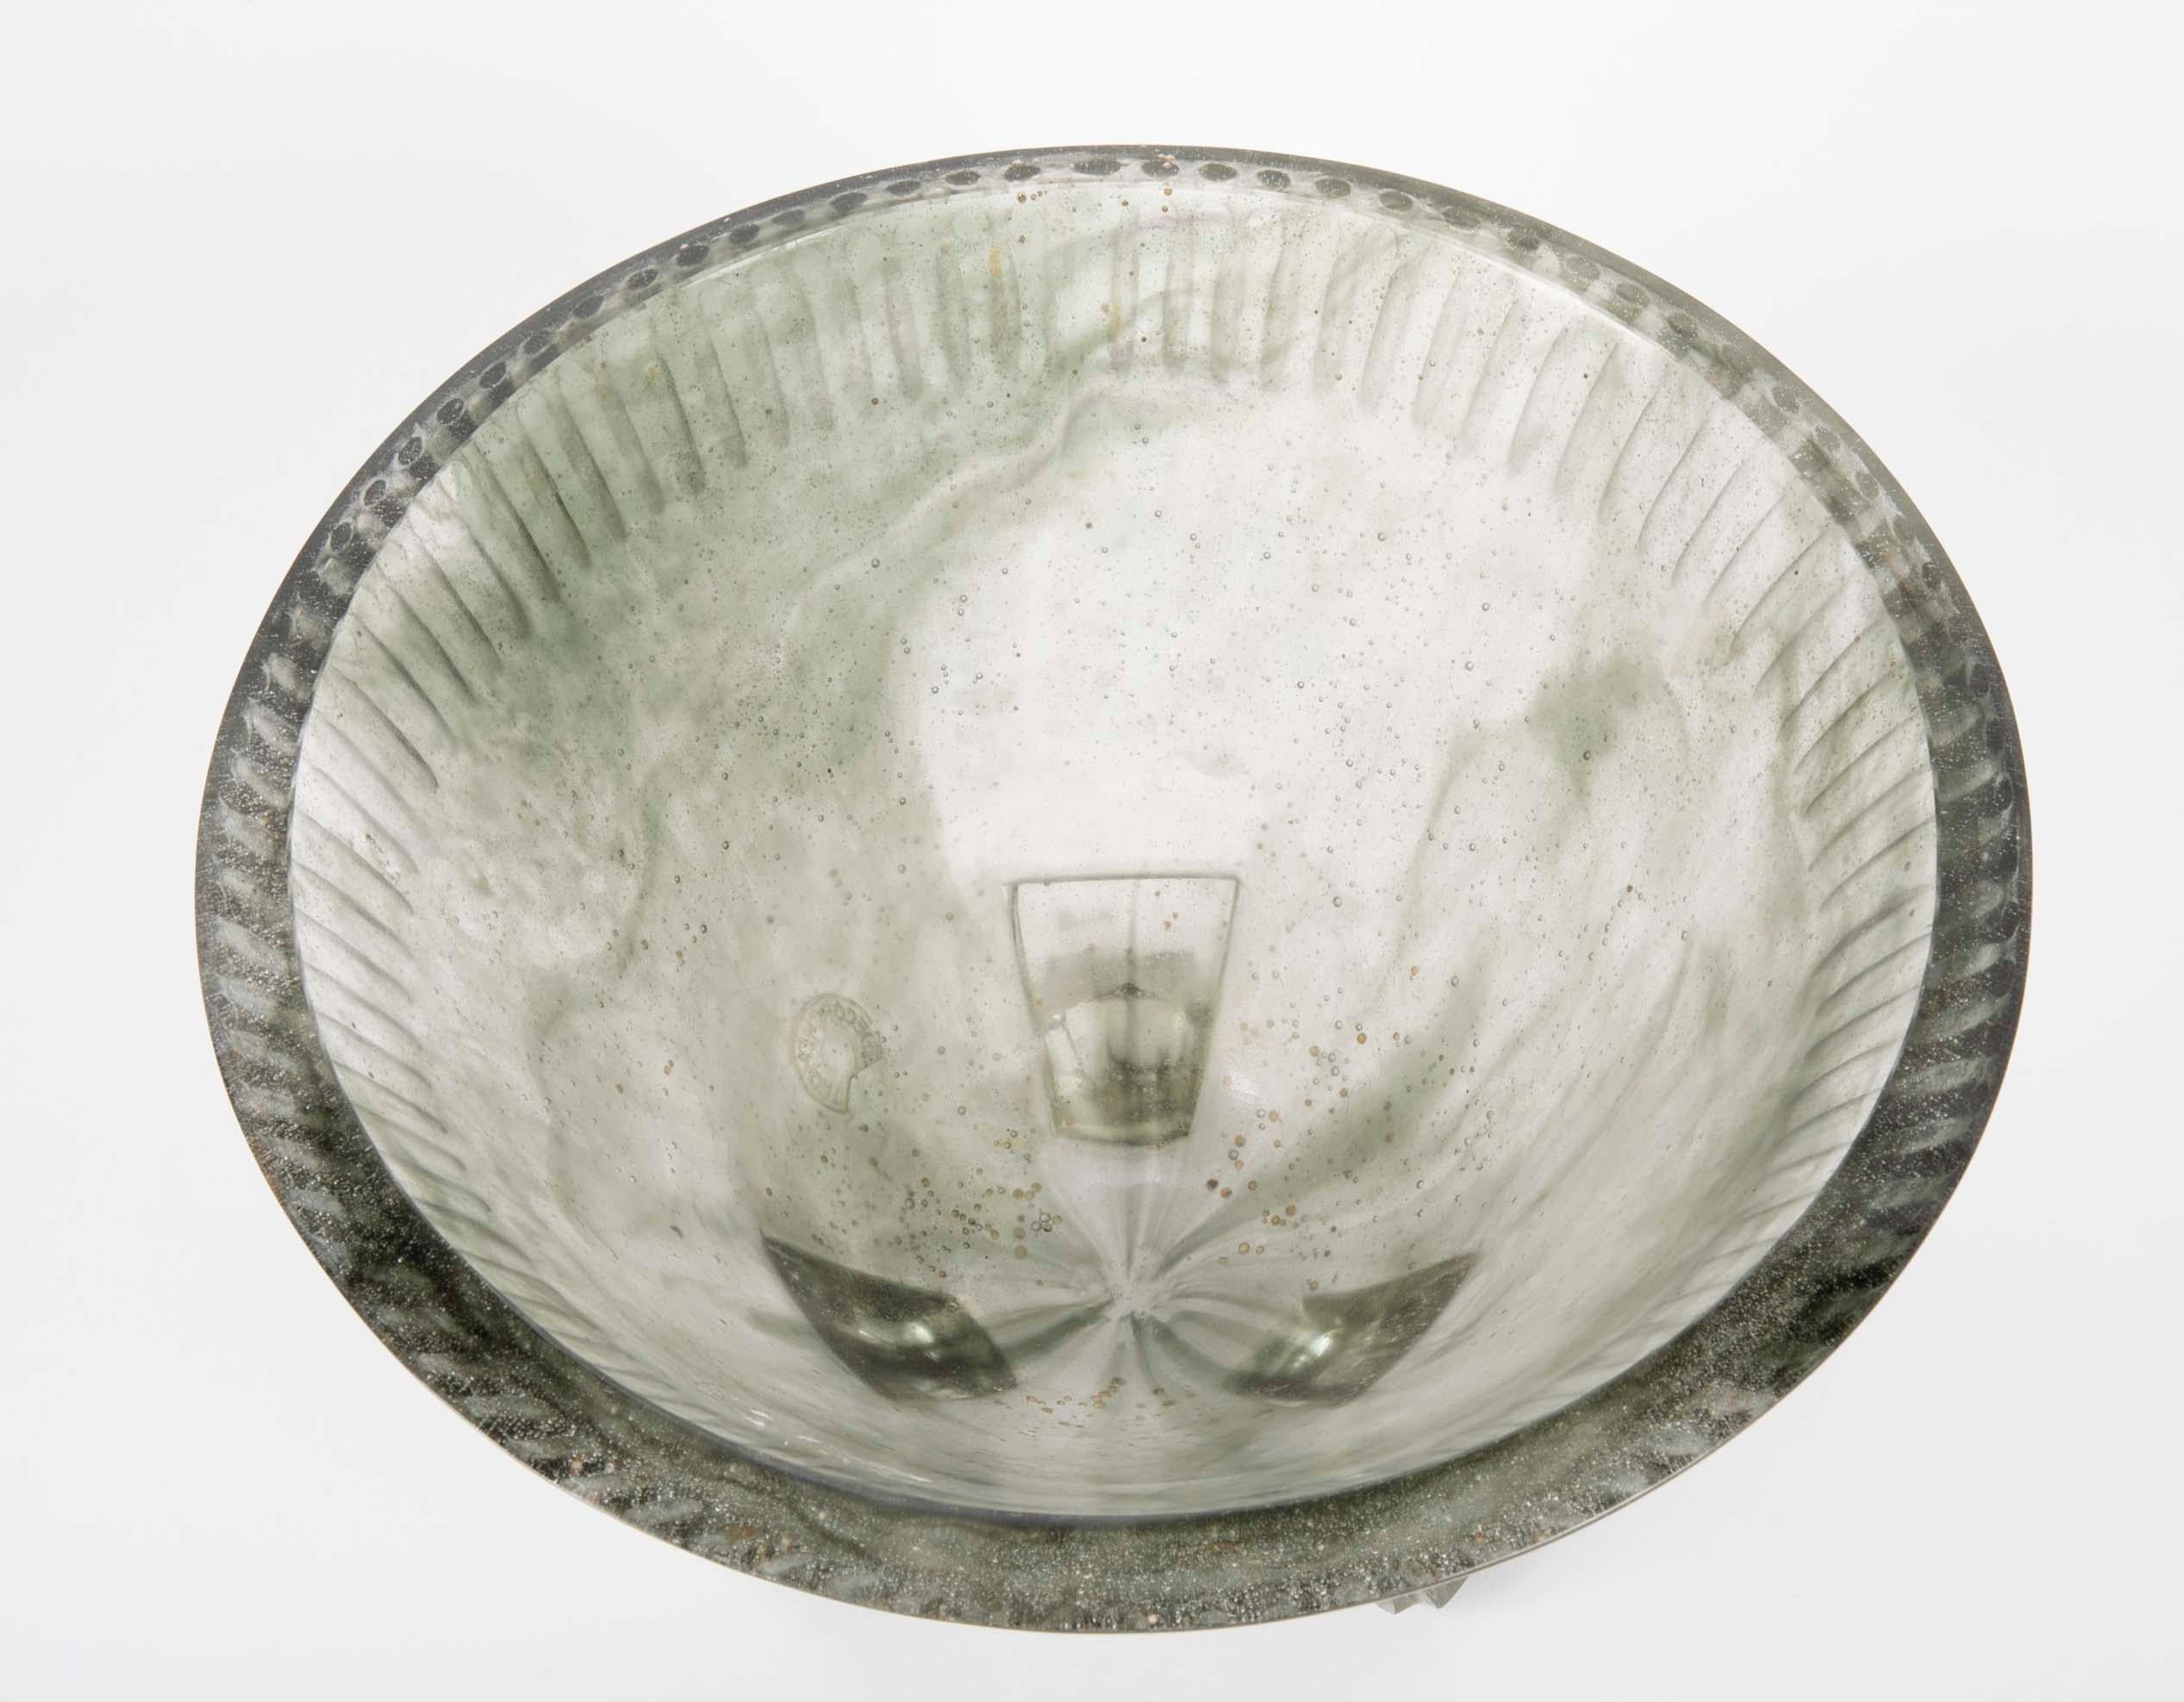 Art Deco Large Smokey Grey Pate De Verre Glass Footed Bowl by Francois Decorchemont